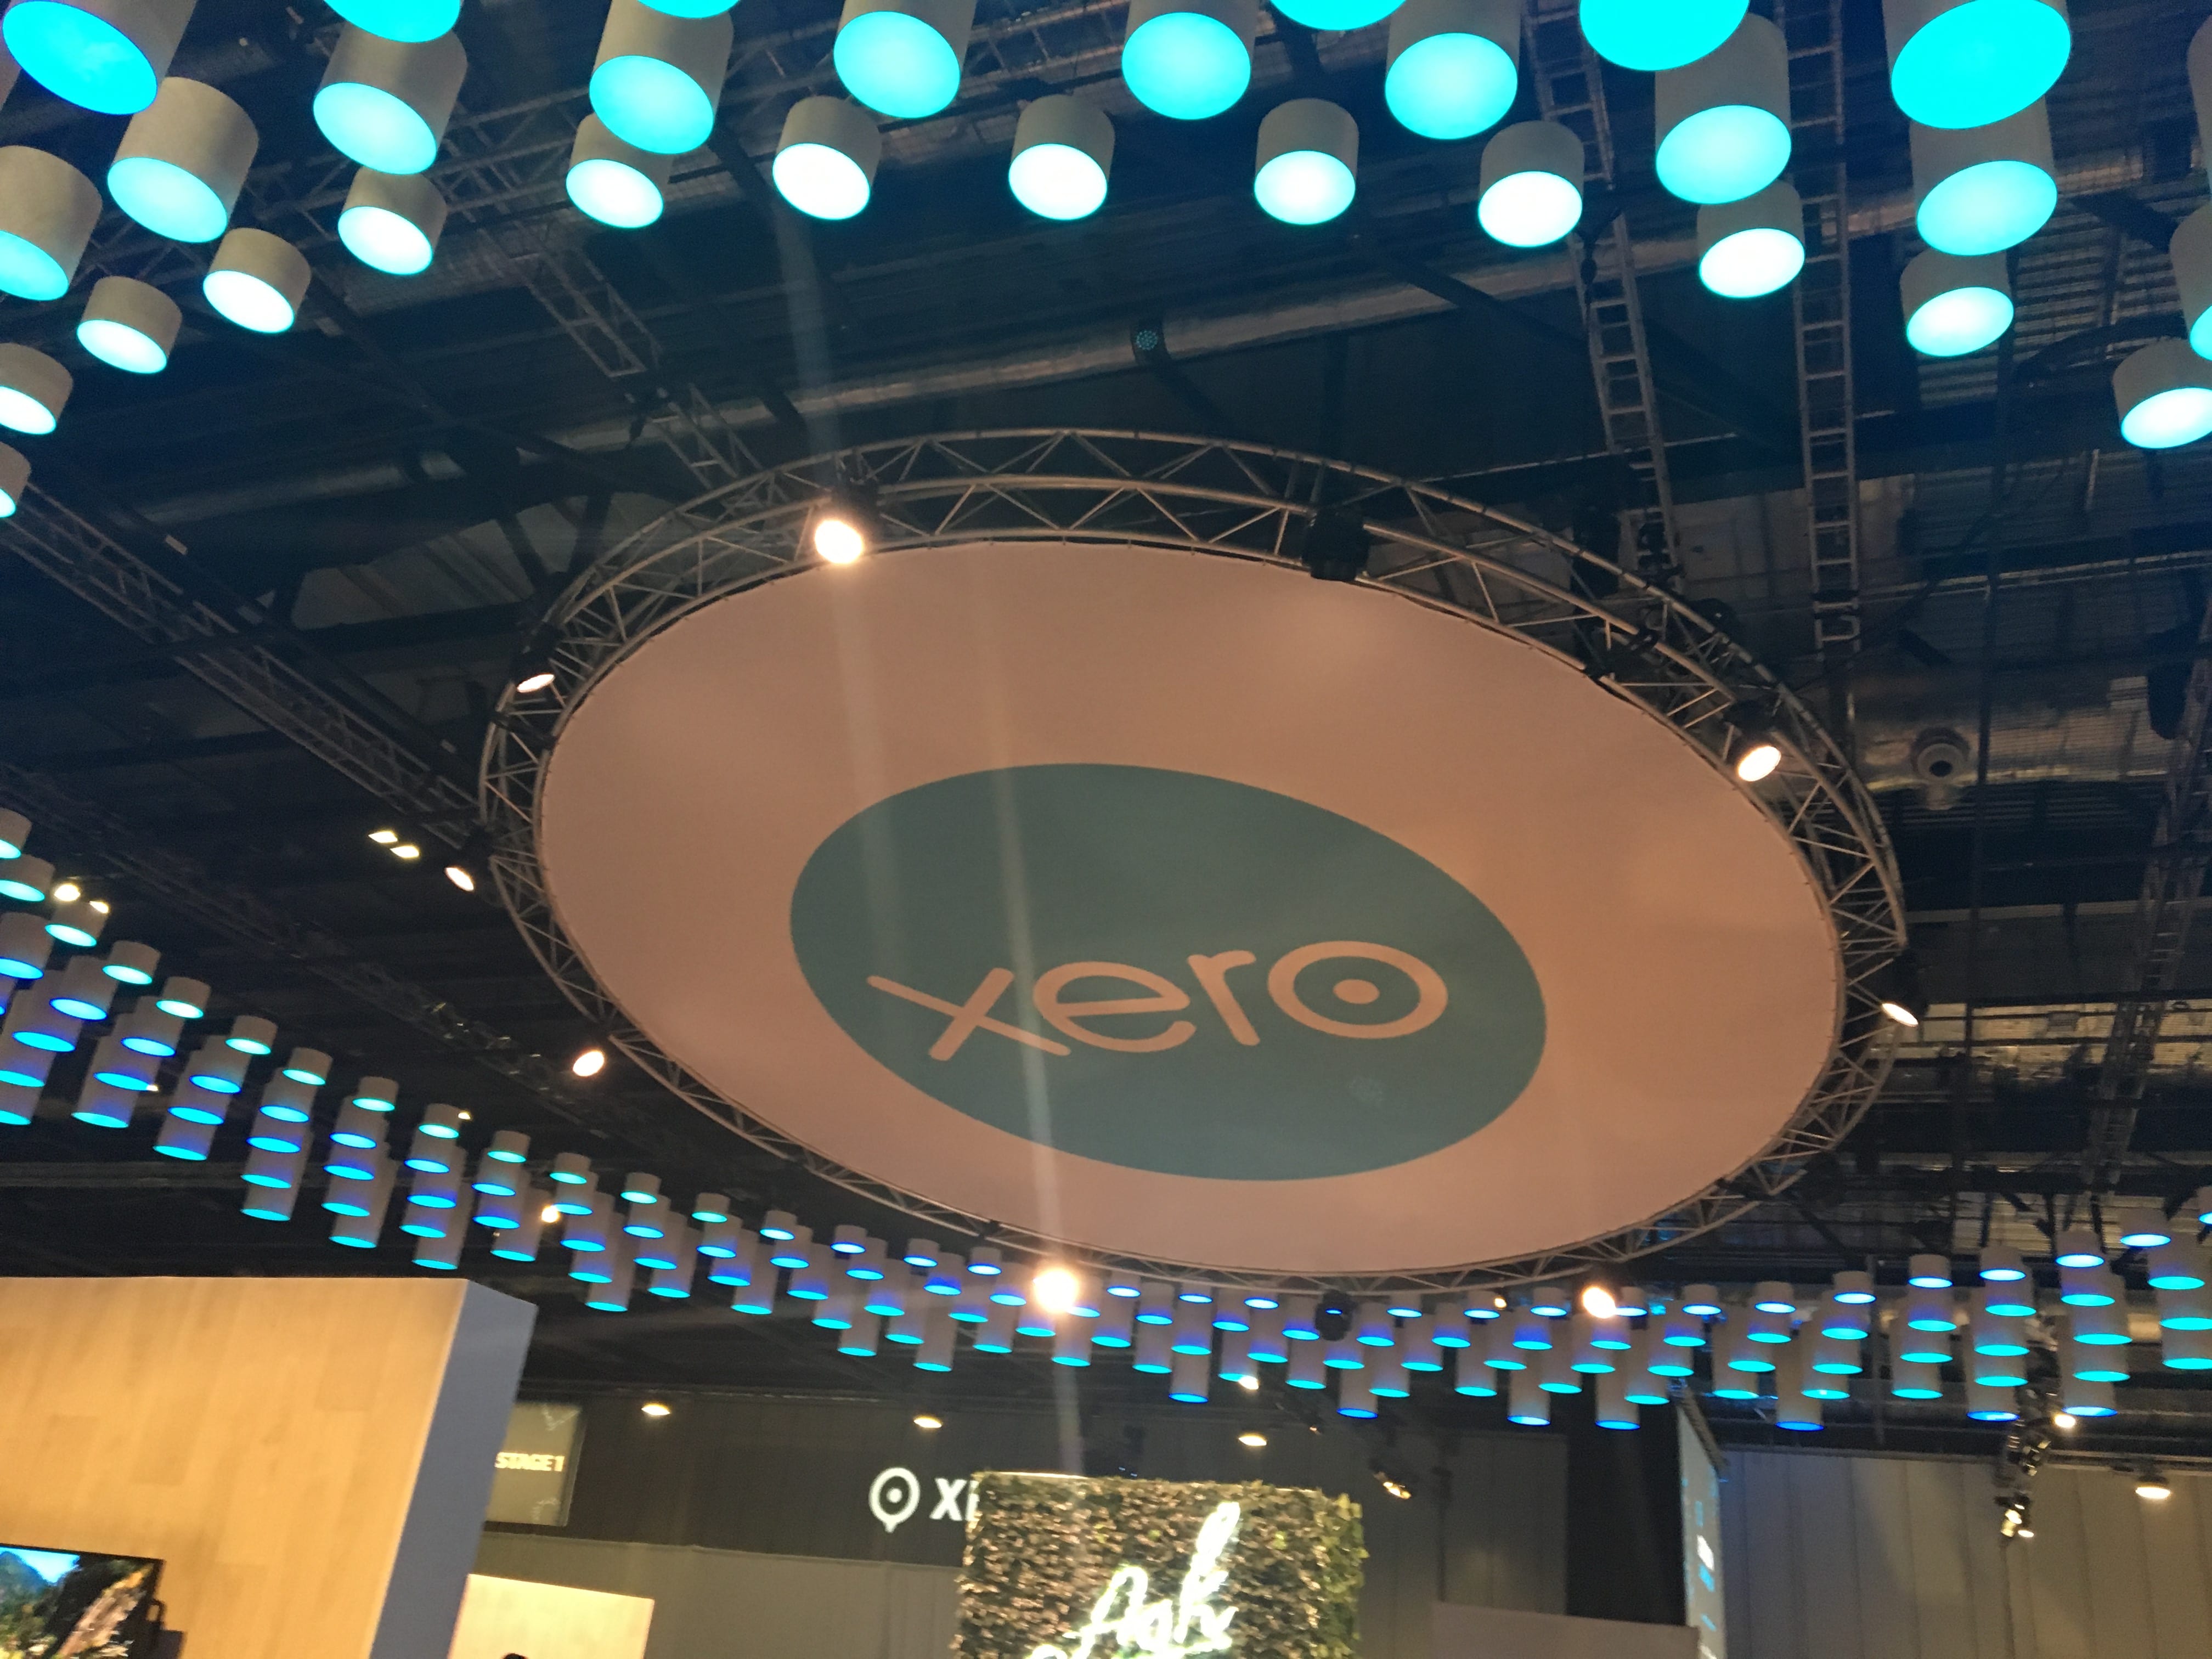 Xerocon ExCeLs once again